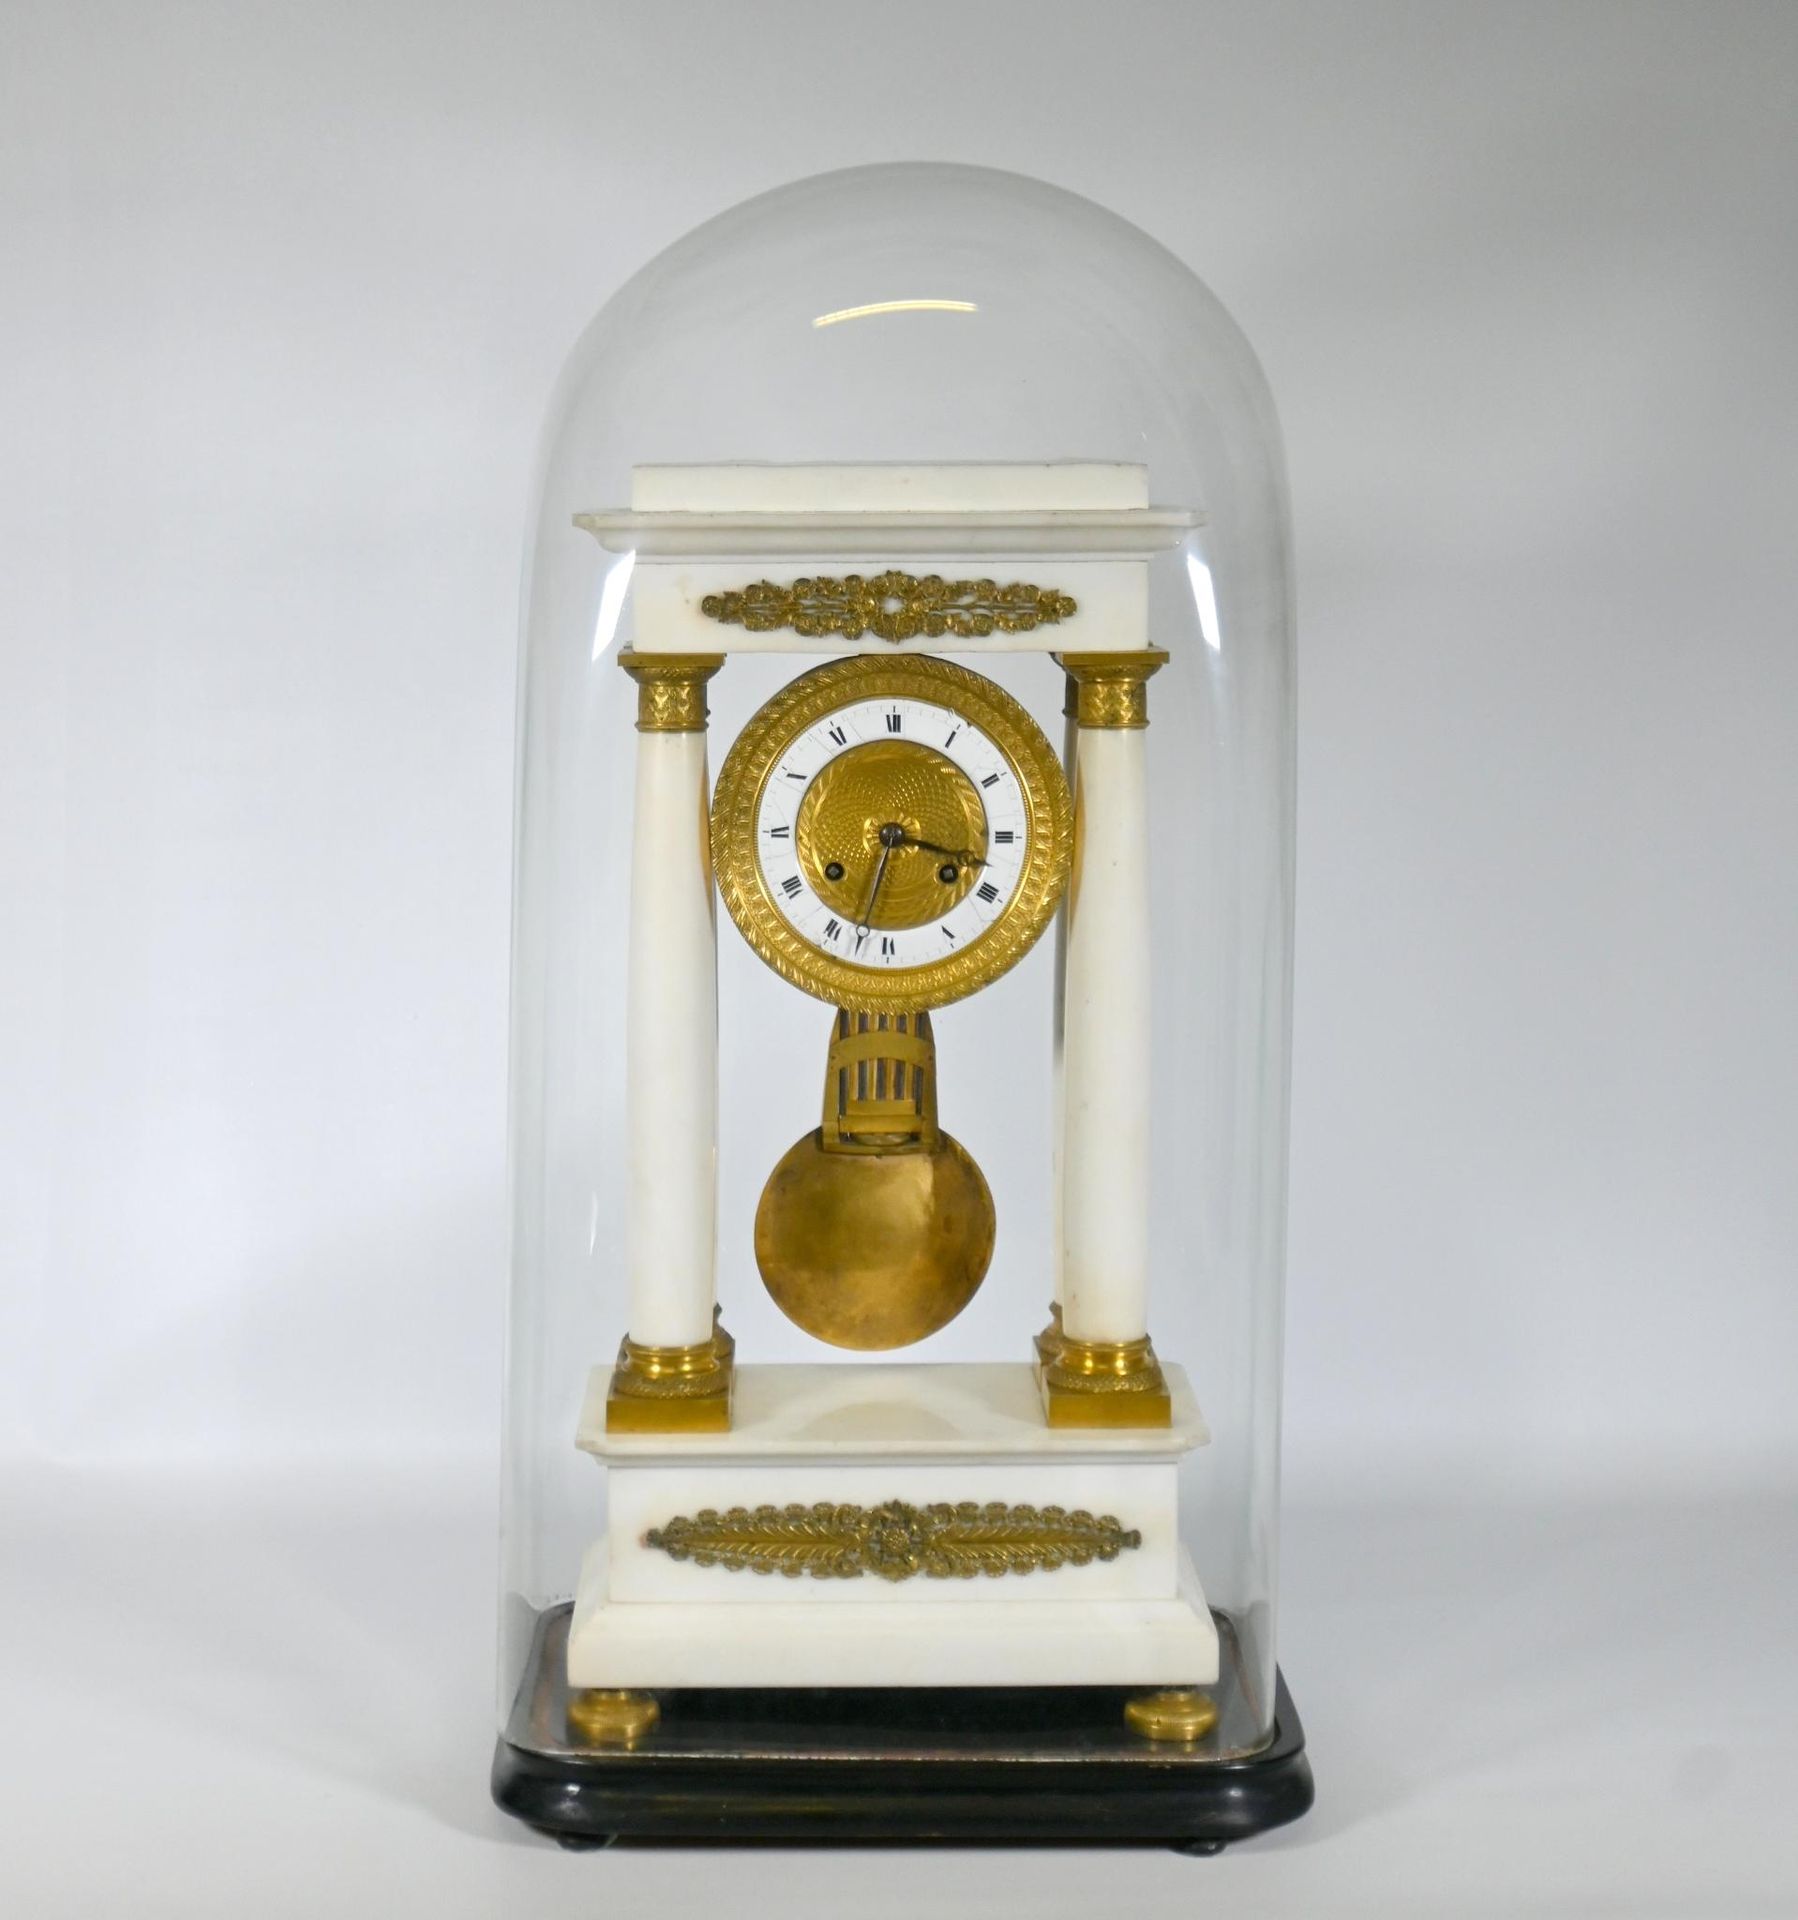 Null Portico" clock in alabaster or marble and gilt bronze, decorated with palme&hellip;